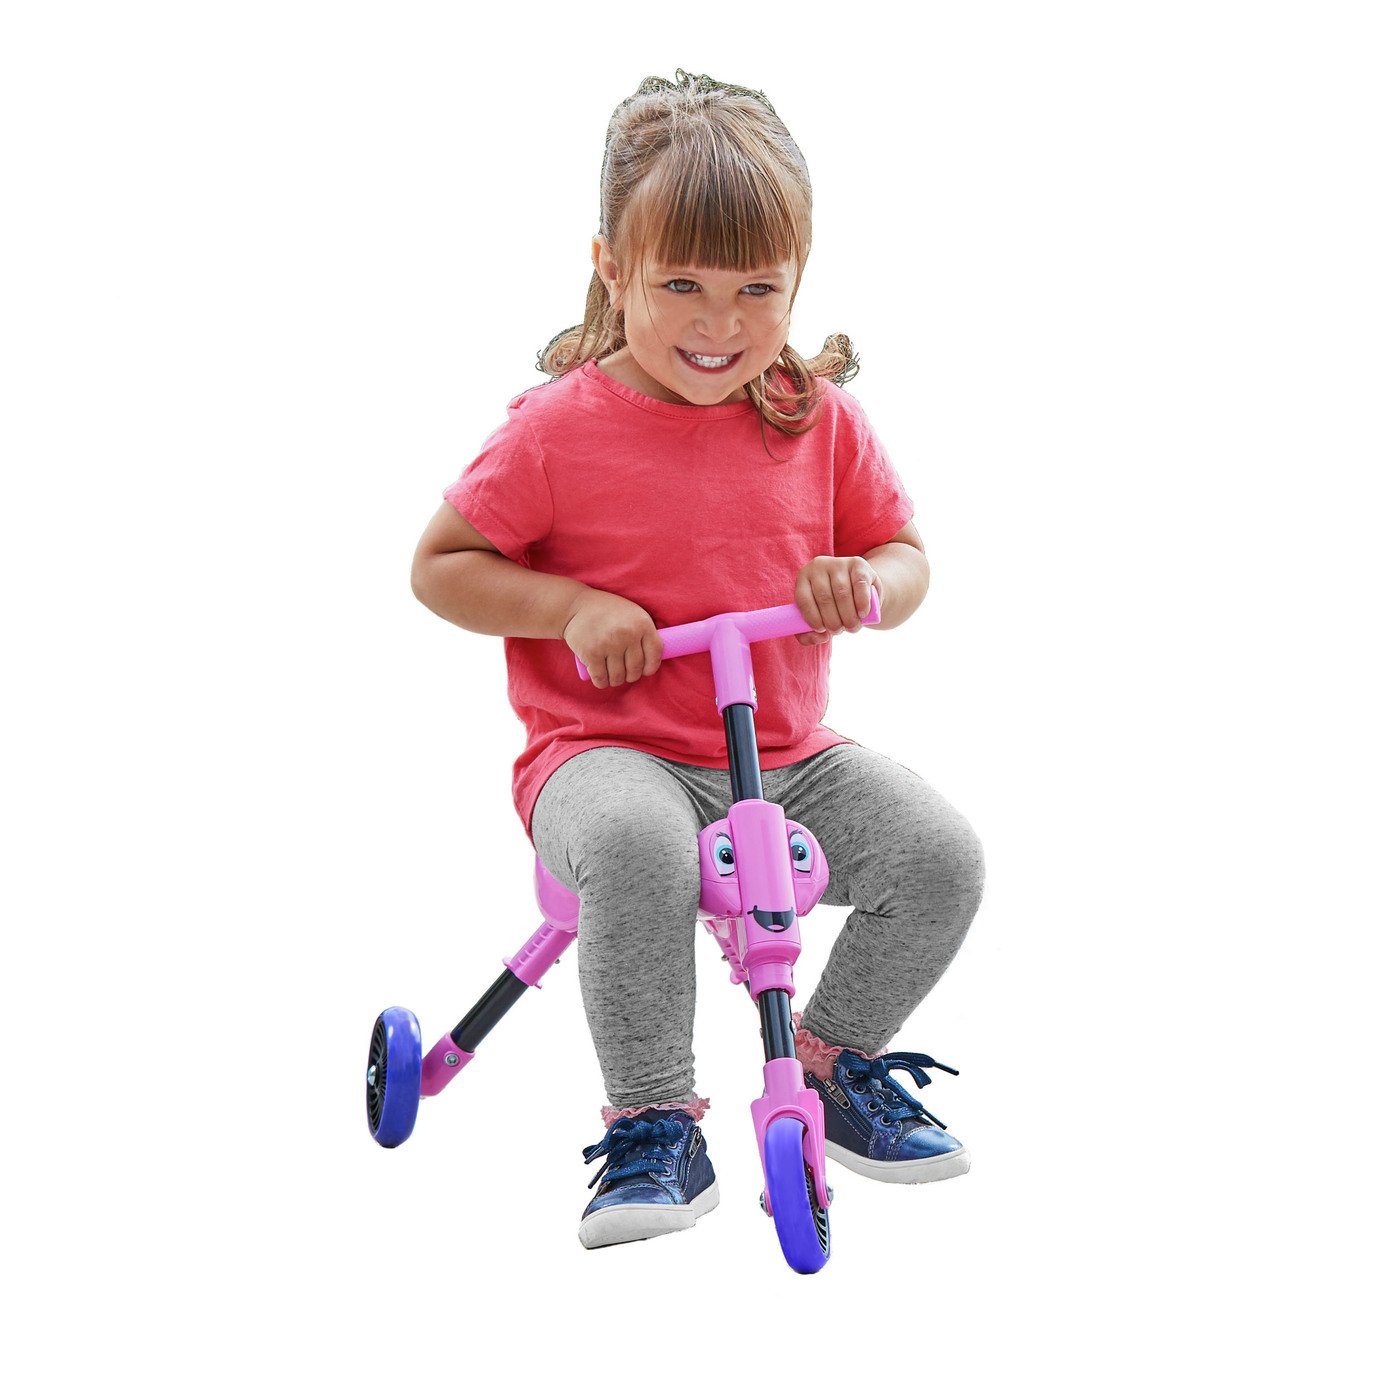 Scuttlebug Butterfly Ride On review